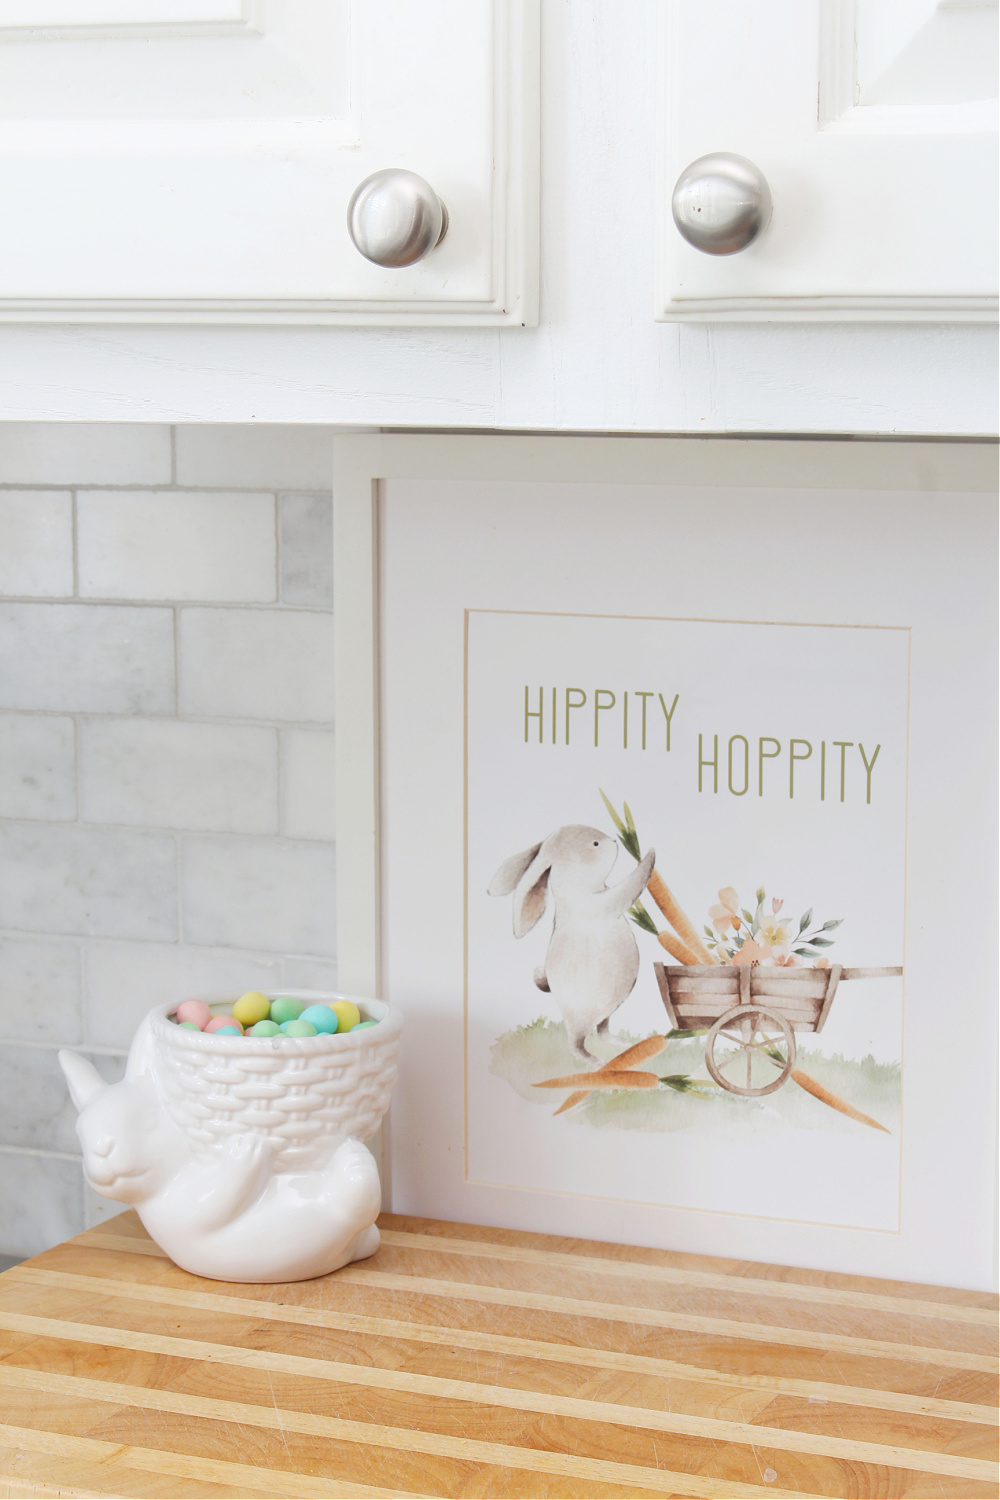 Hippity Hoppity Easter printables with vintage style bunny and wheelcbarrow with carrots.